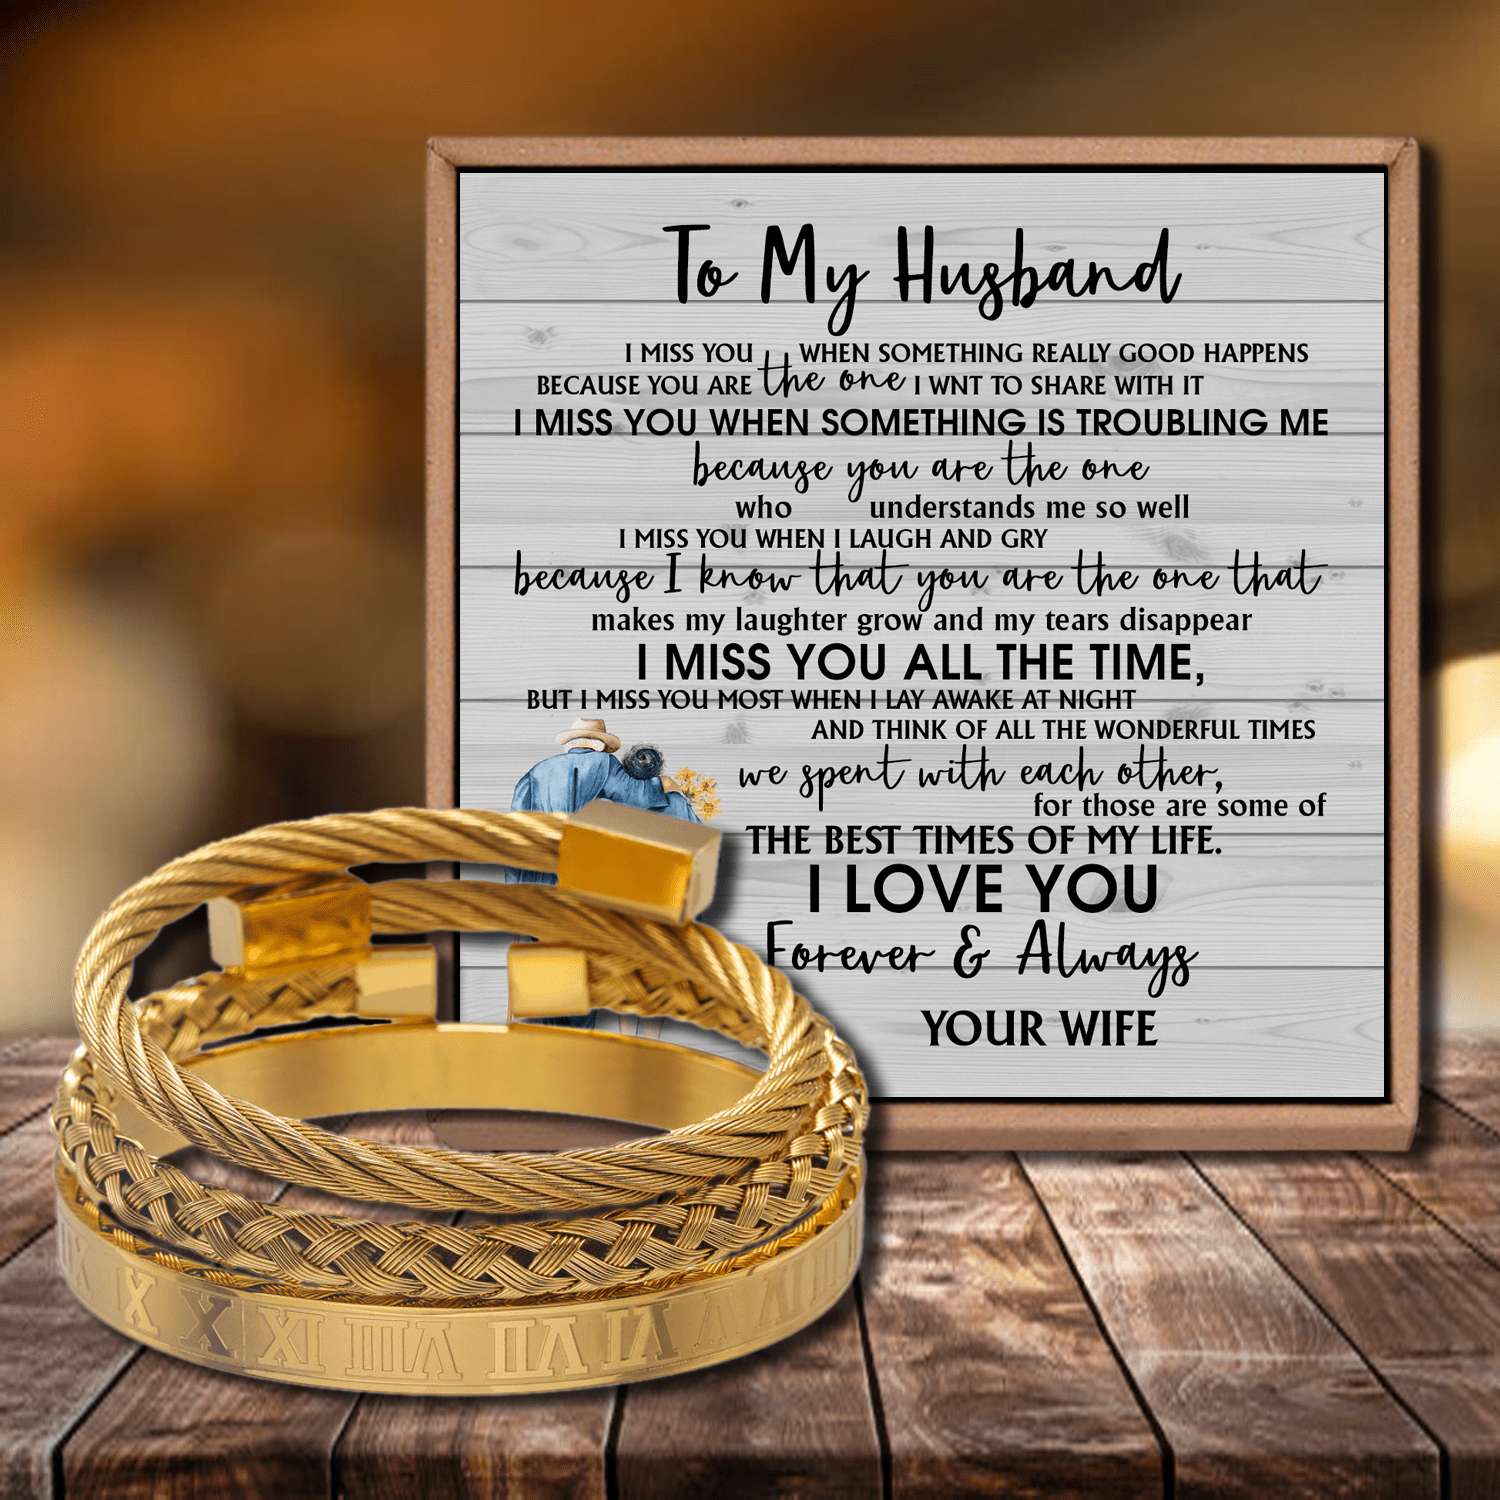 Bracelets To My Husband - I Love You Forever And Always Roman Numeral Bracelet Set Gold GiveMe-Gifts